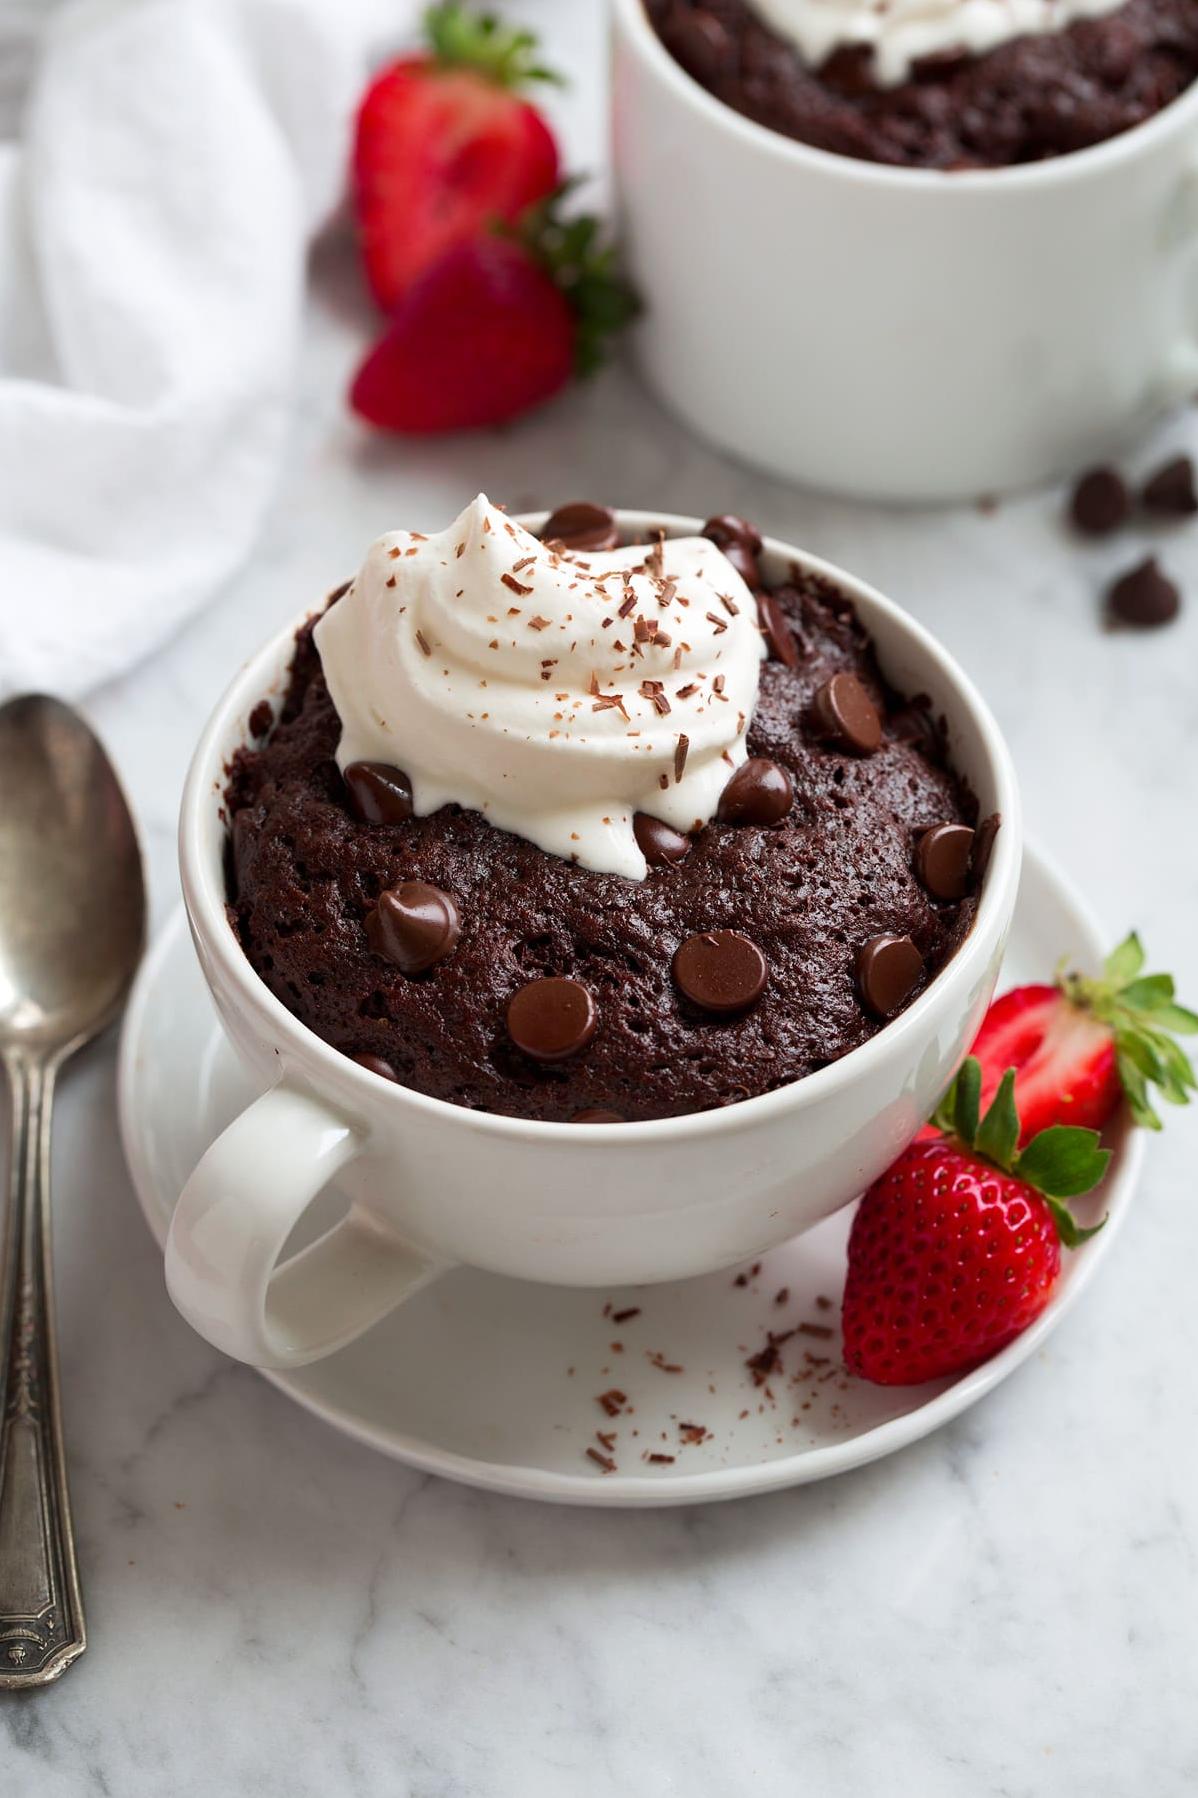  The moist chocolate cake and melted chocolate chips create a perfect balance of sweet and rich flavors.